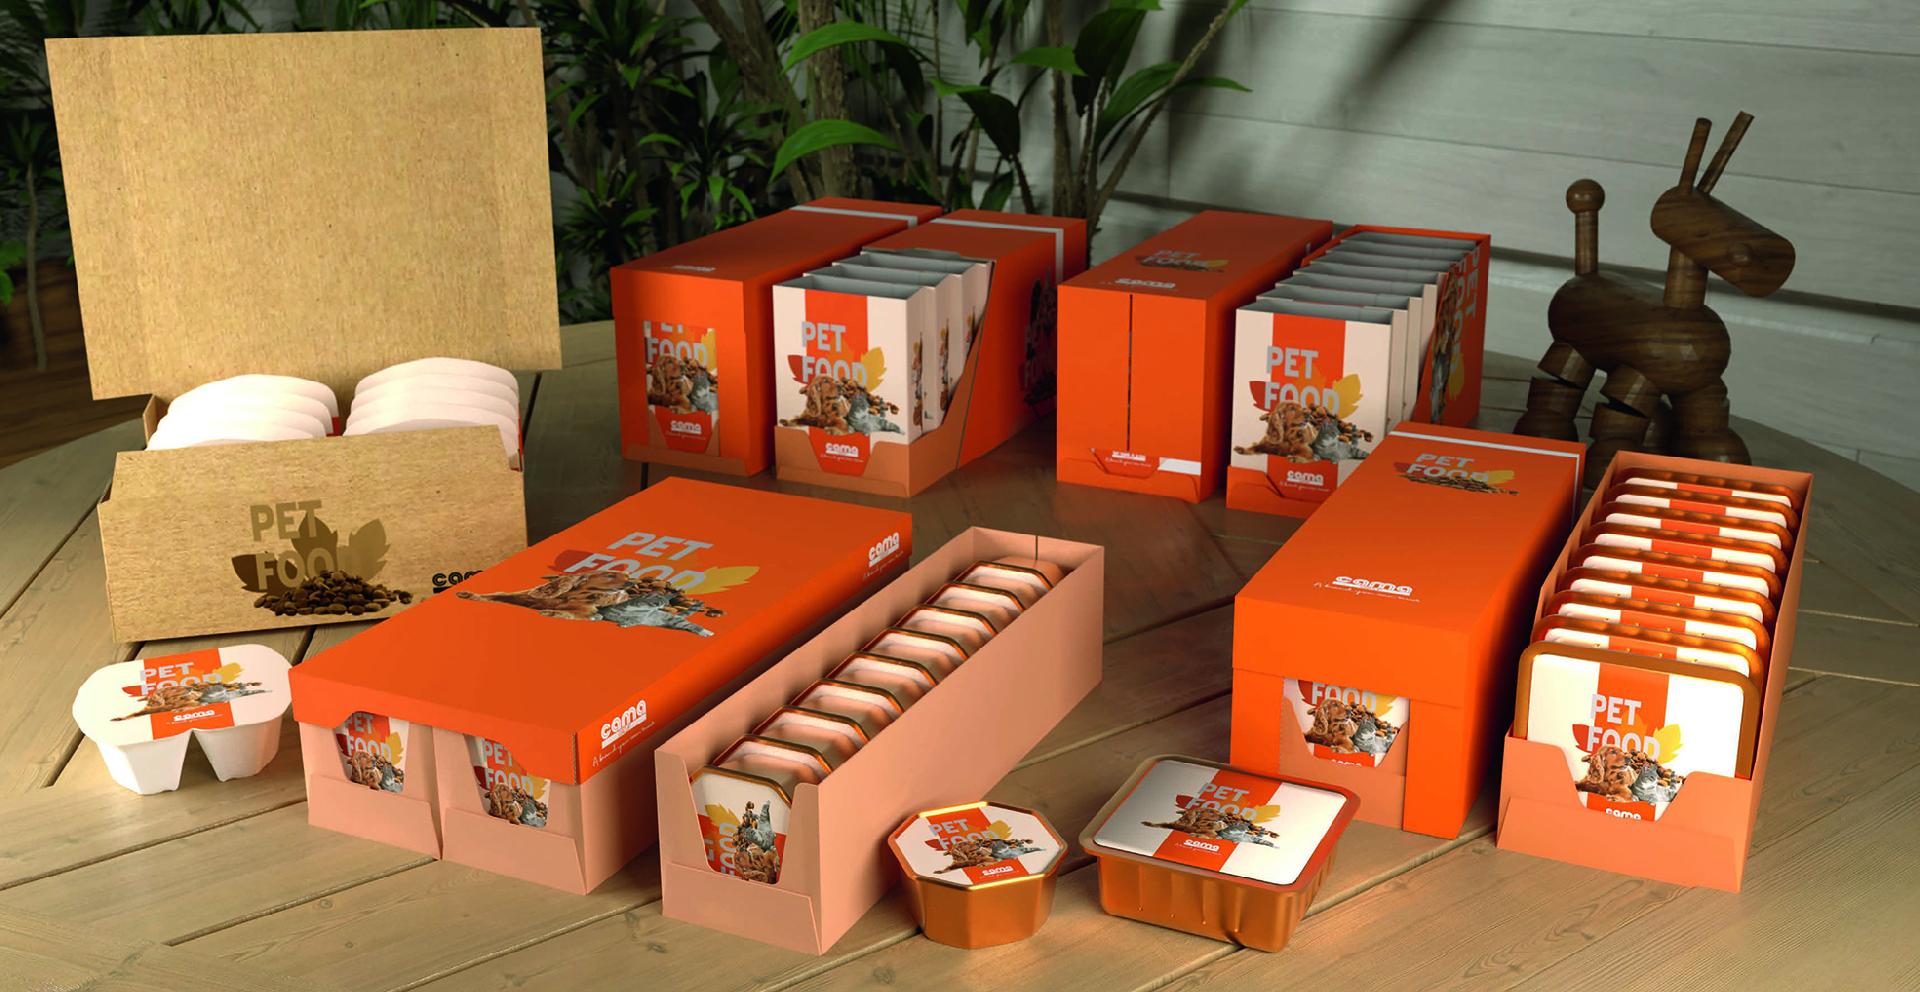 Packaging variety is not an issue… if you have the right solution